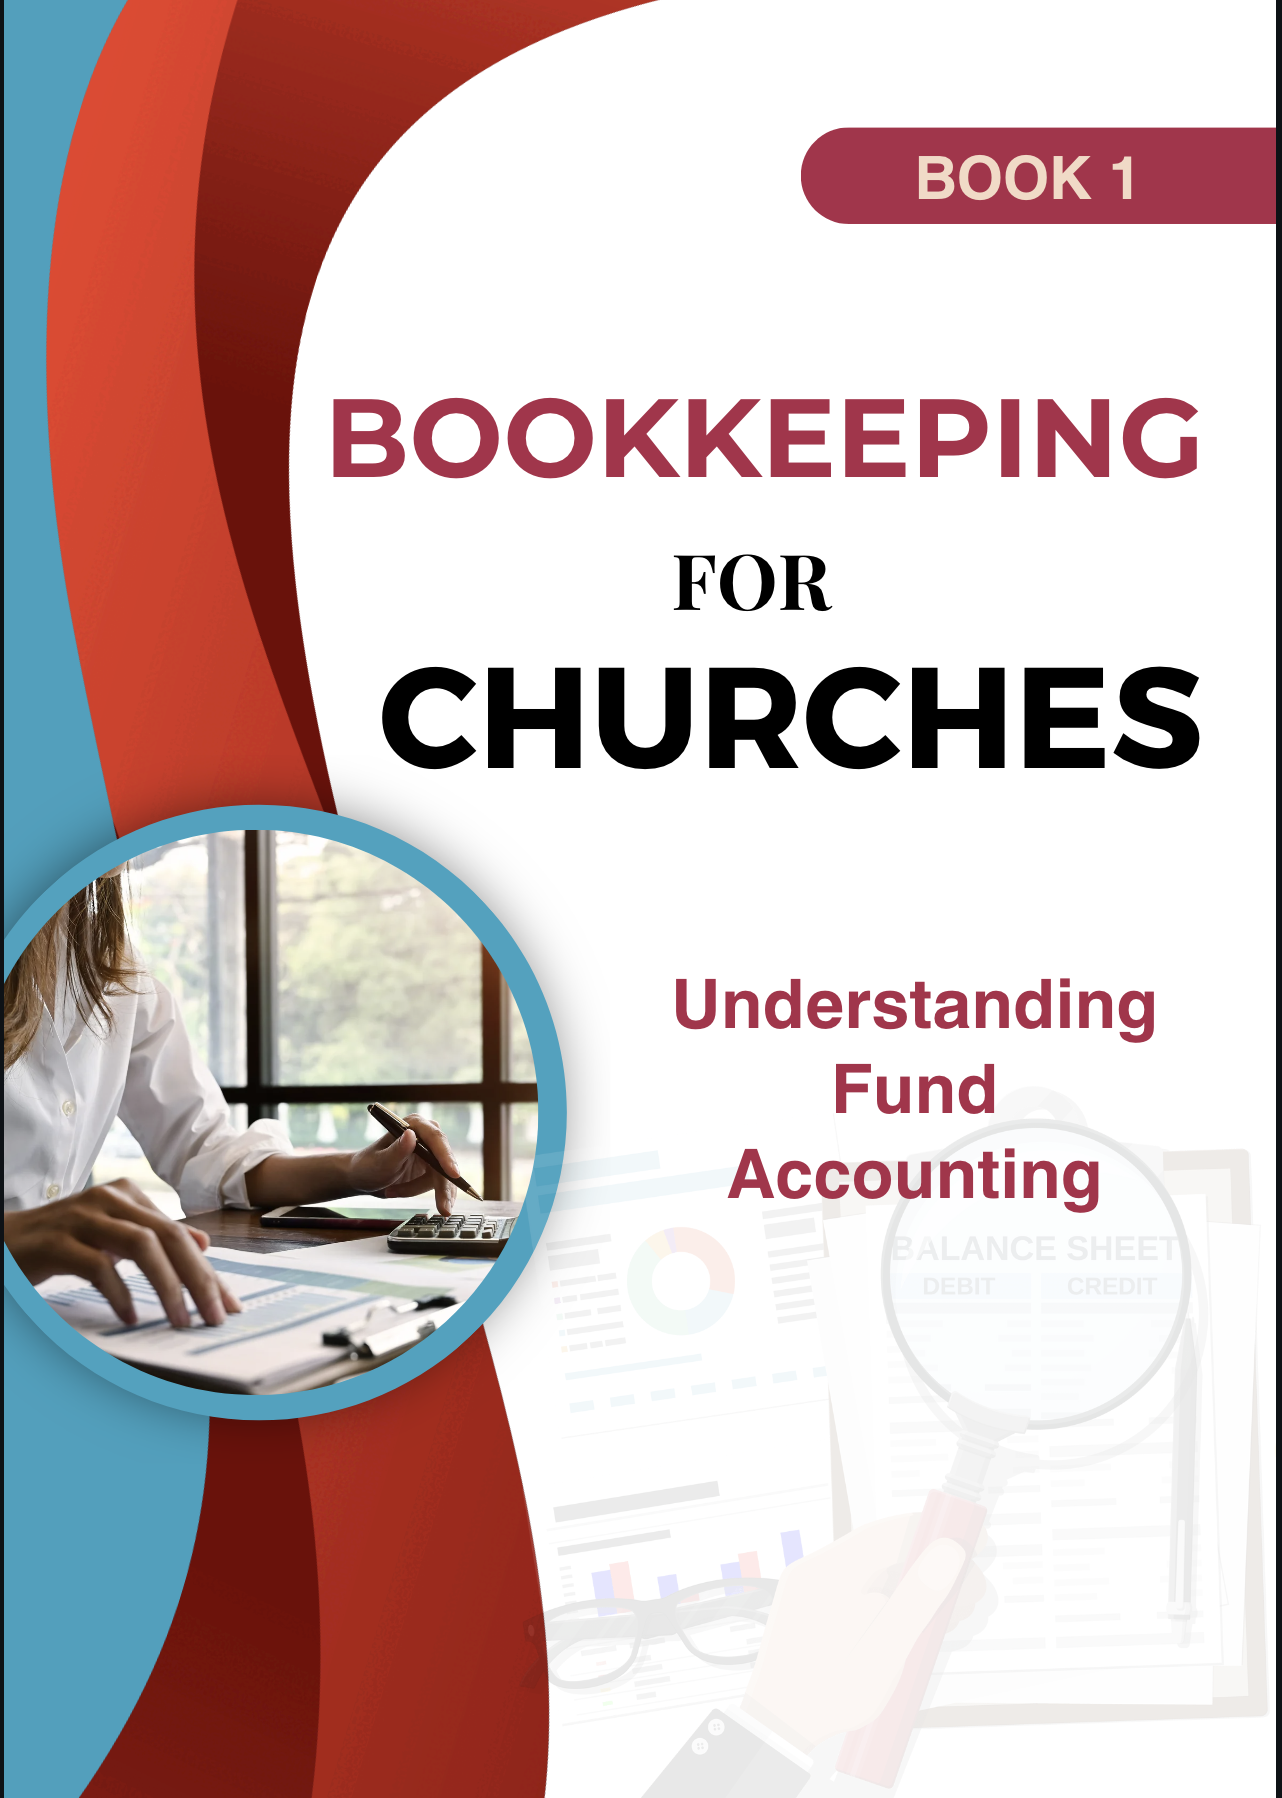 Bookkeeping for Churches: Understanding Fund Accounting